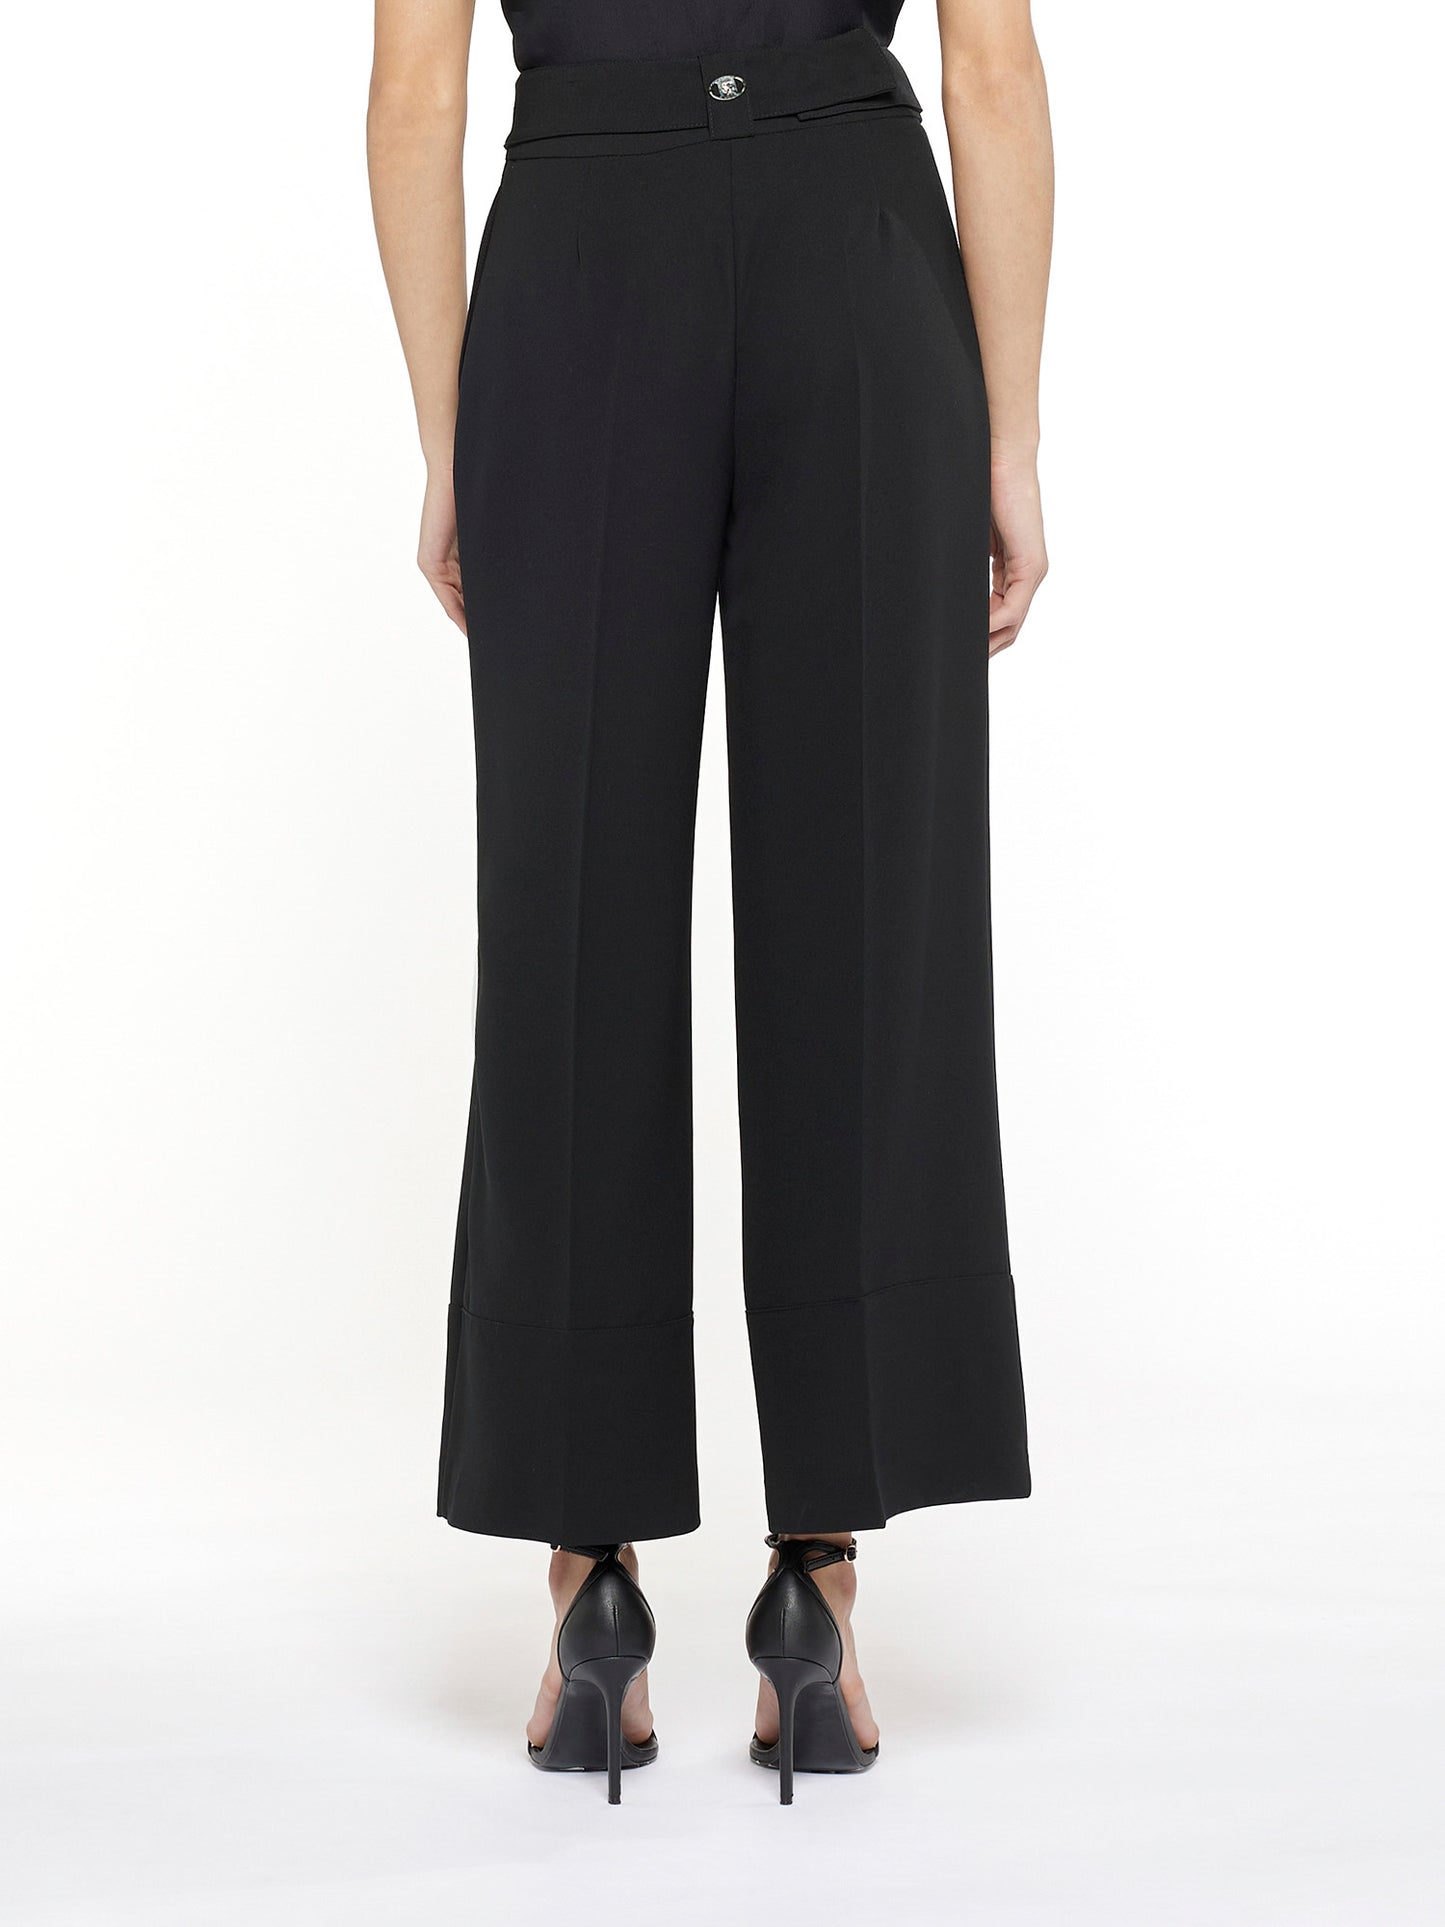 Trousers with bamboo ring detail